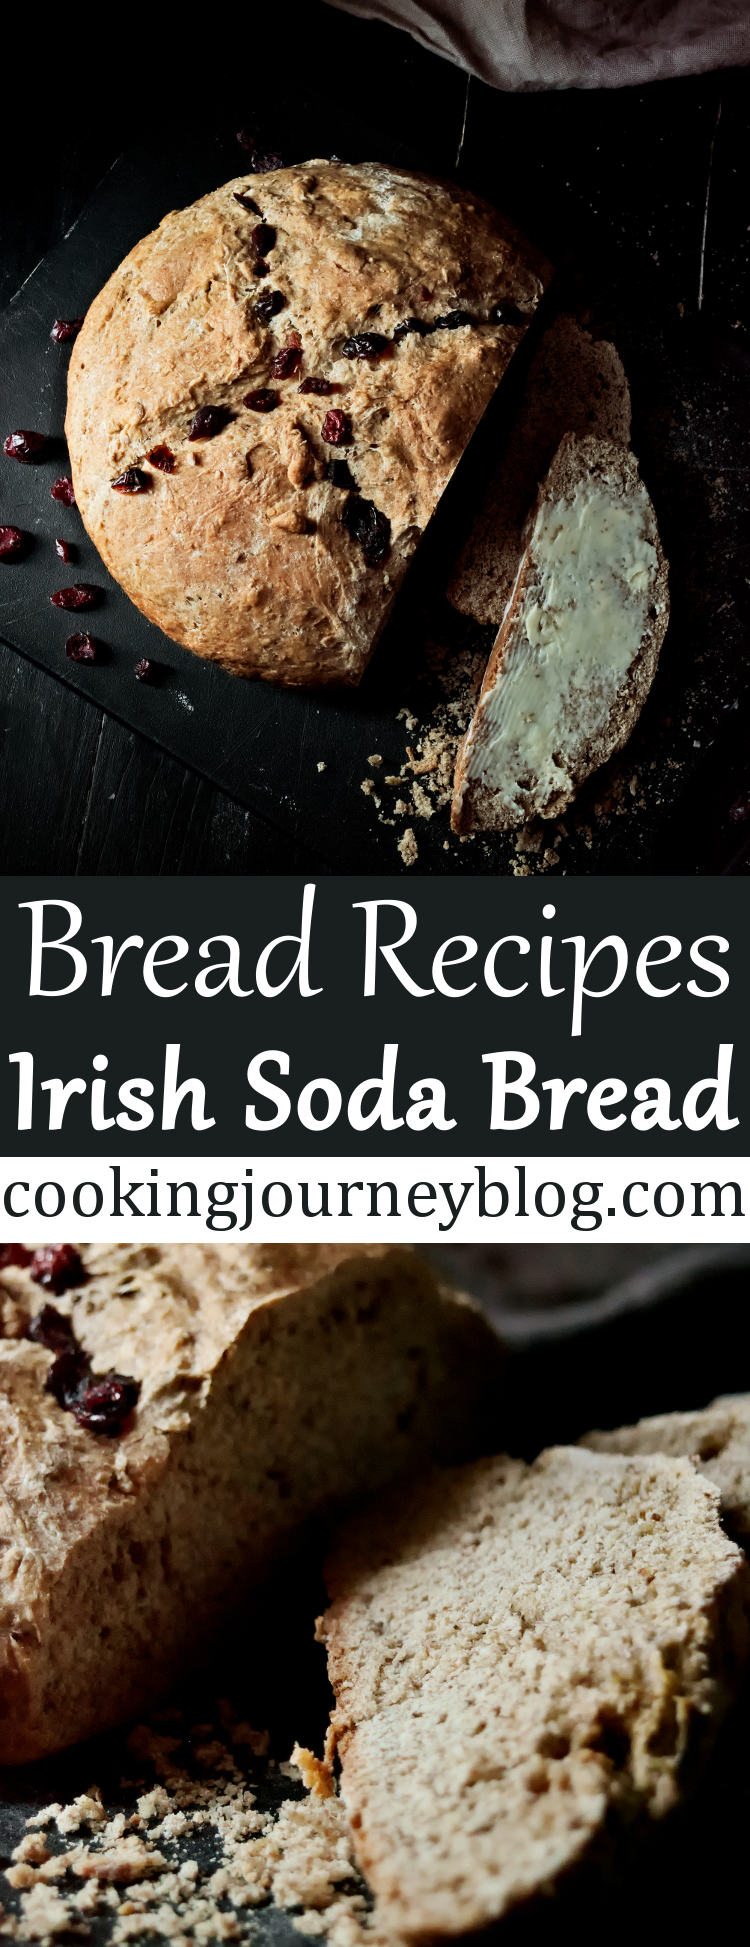 Irish soda bread is an easy homemade bread. This is a traditional Irish food, as for centuries families used to have whole wheat bread on the table. You will love to make this no yeast bread for St Patrick's day or every day! #irish #bread #stpatricksday